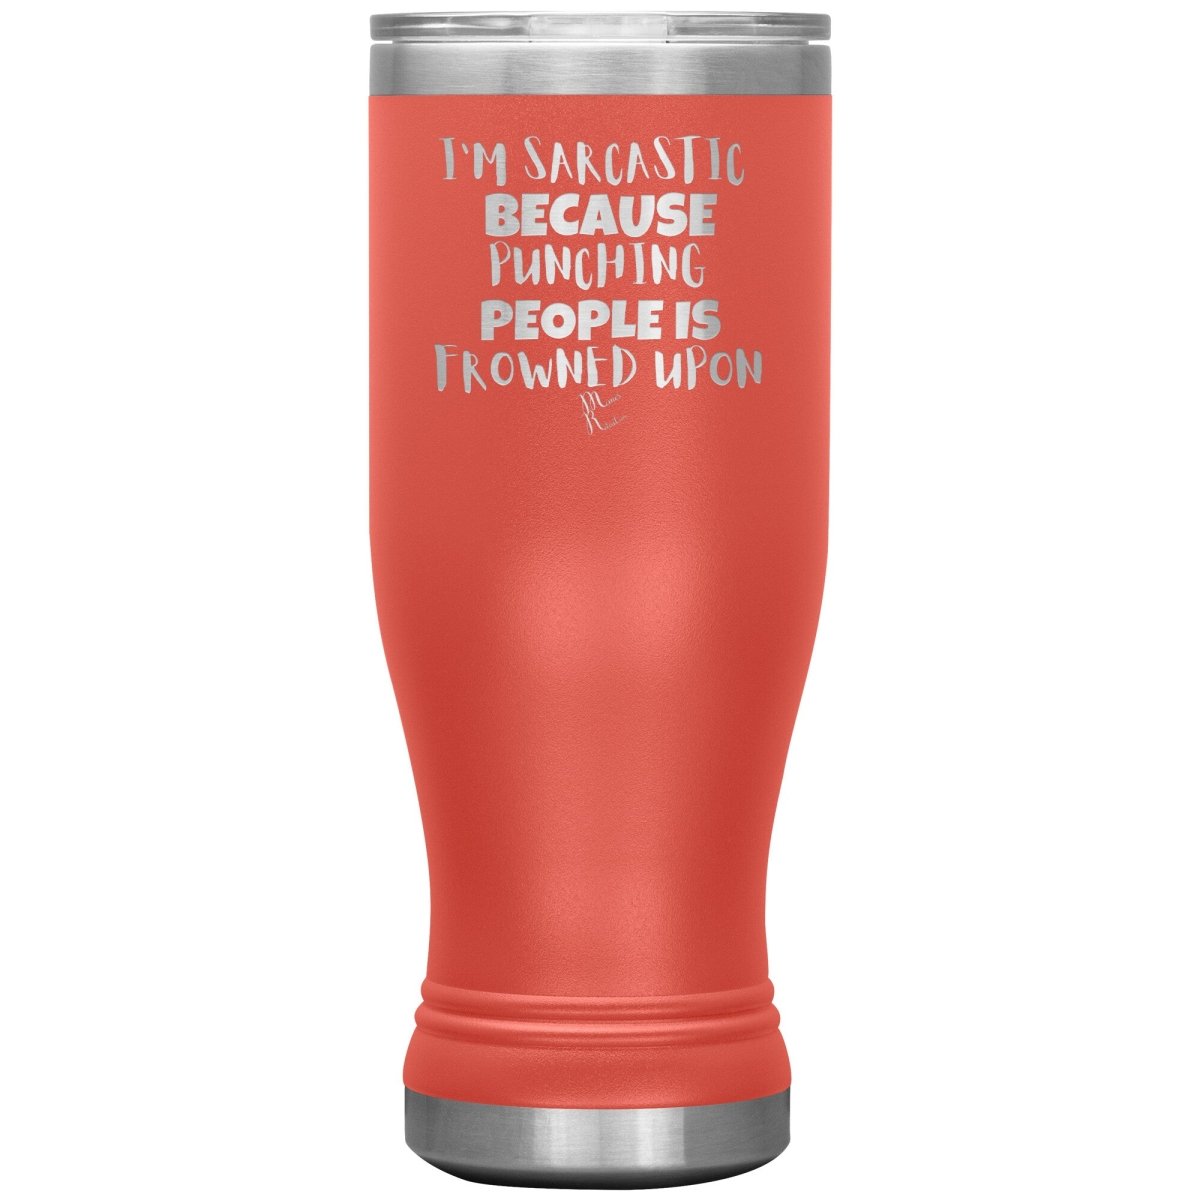 I'm Sarcastic Because Punching People is Frowned Upon Tumblers, 20oz BOHO Insulated Tumbler / Coral - MemesRetail.com